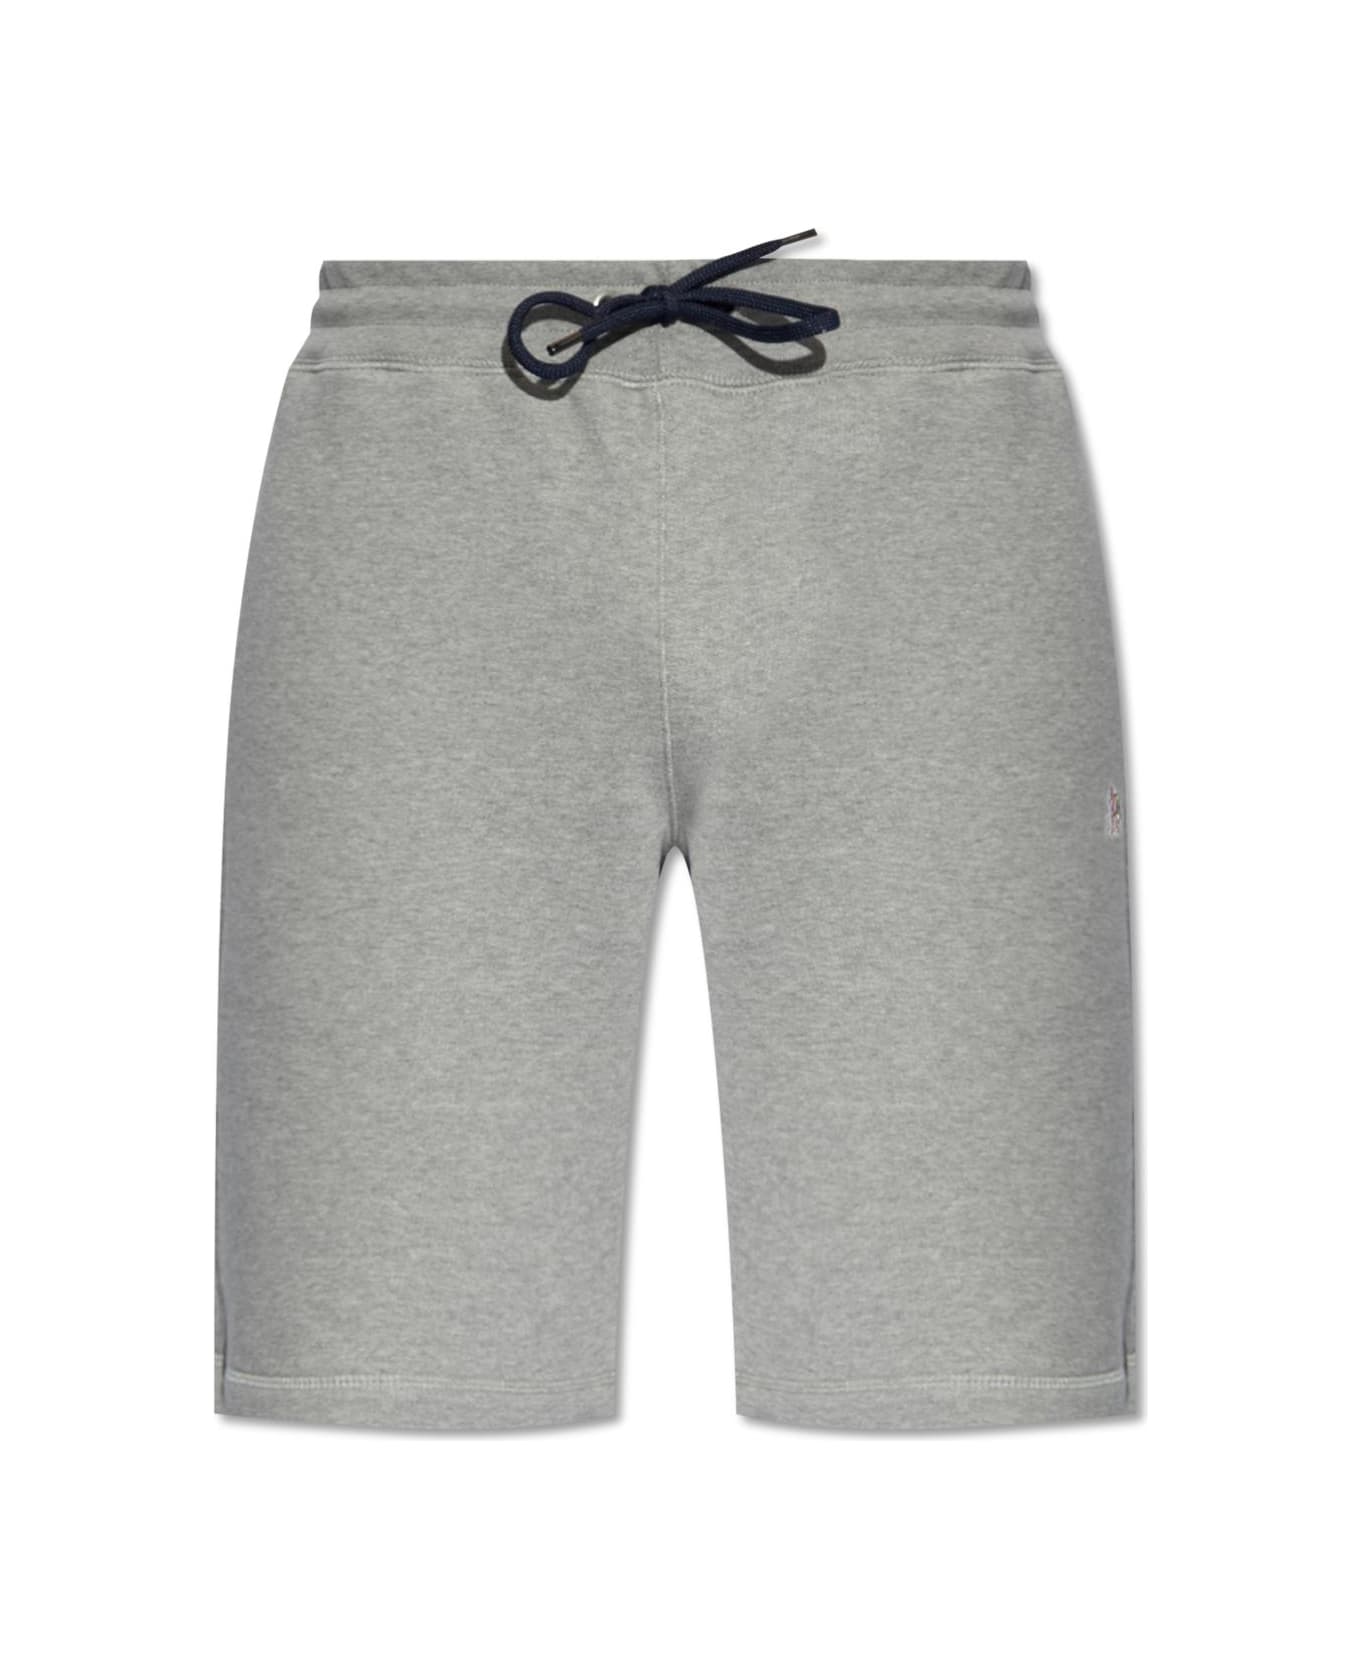 PS by Paul Smith Ps Paul Smith Cotton Shorts - Grey